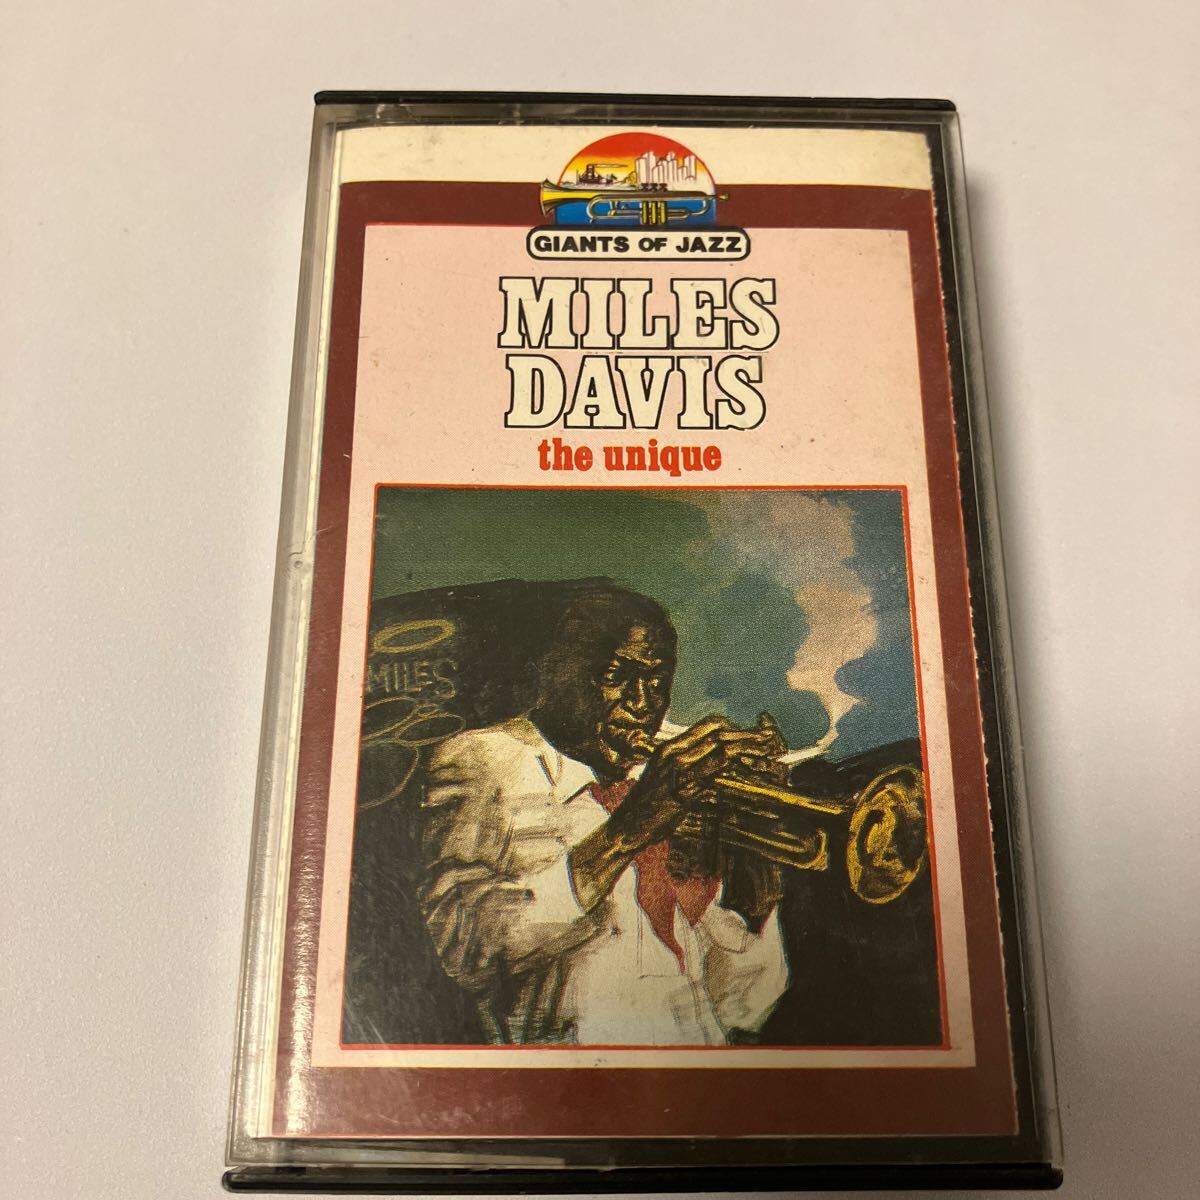 [ Italy record western-style music cassette tape ] mile s* Davis |THE UNIQUE VOL.2| Jazz, bebop | cassette tape,CD great number exhibiting 